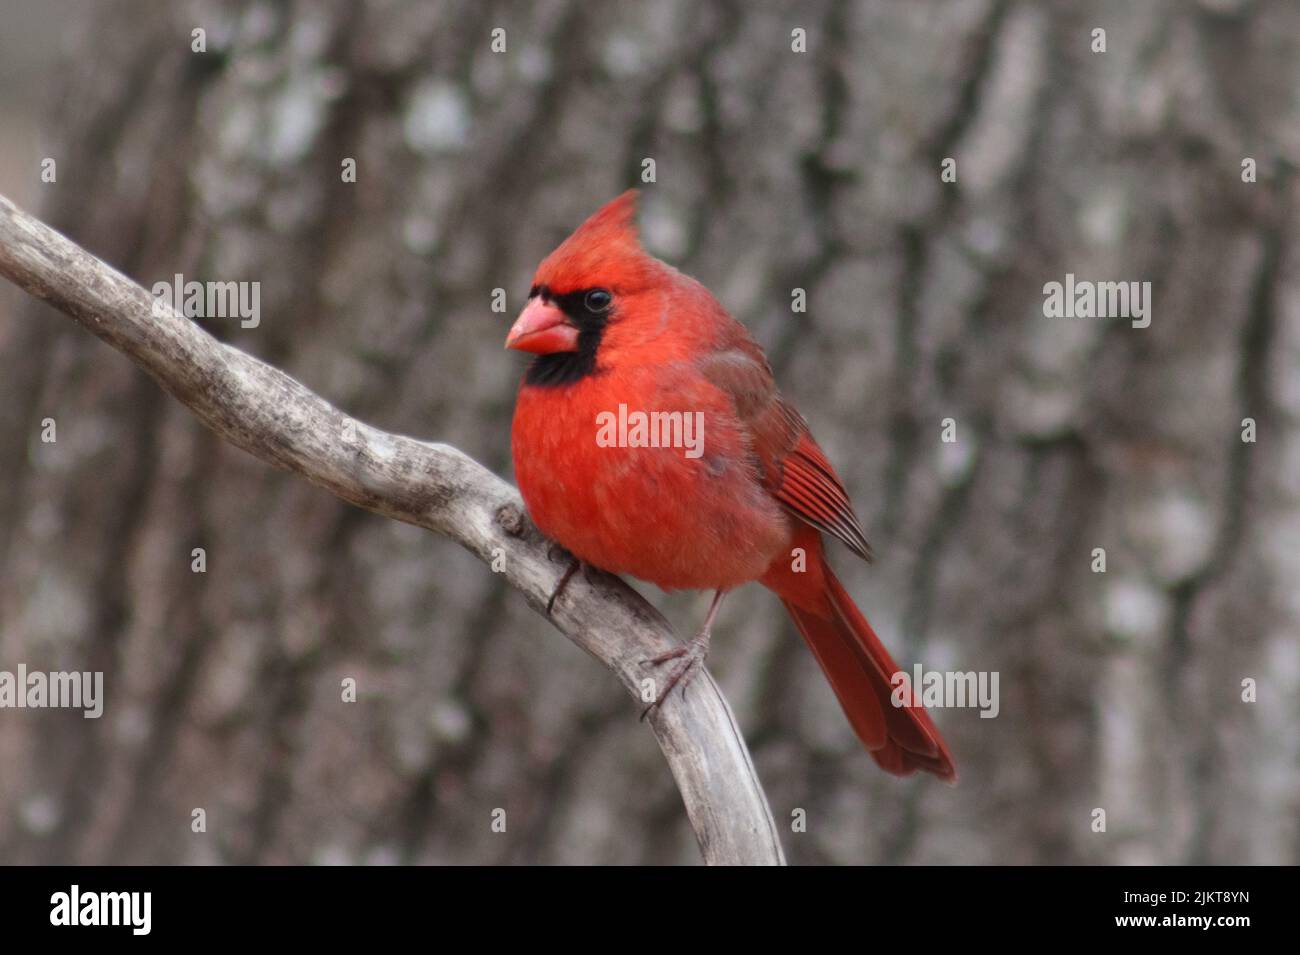 A selective focus shot of a red cardinal bird perching on twig Stock Photo